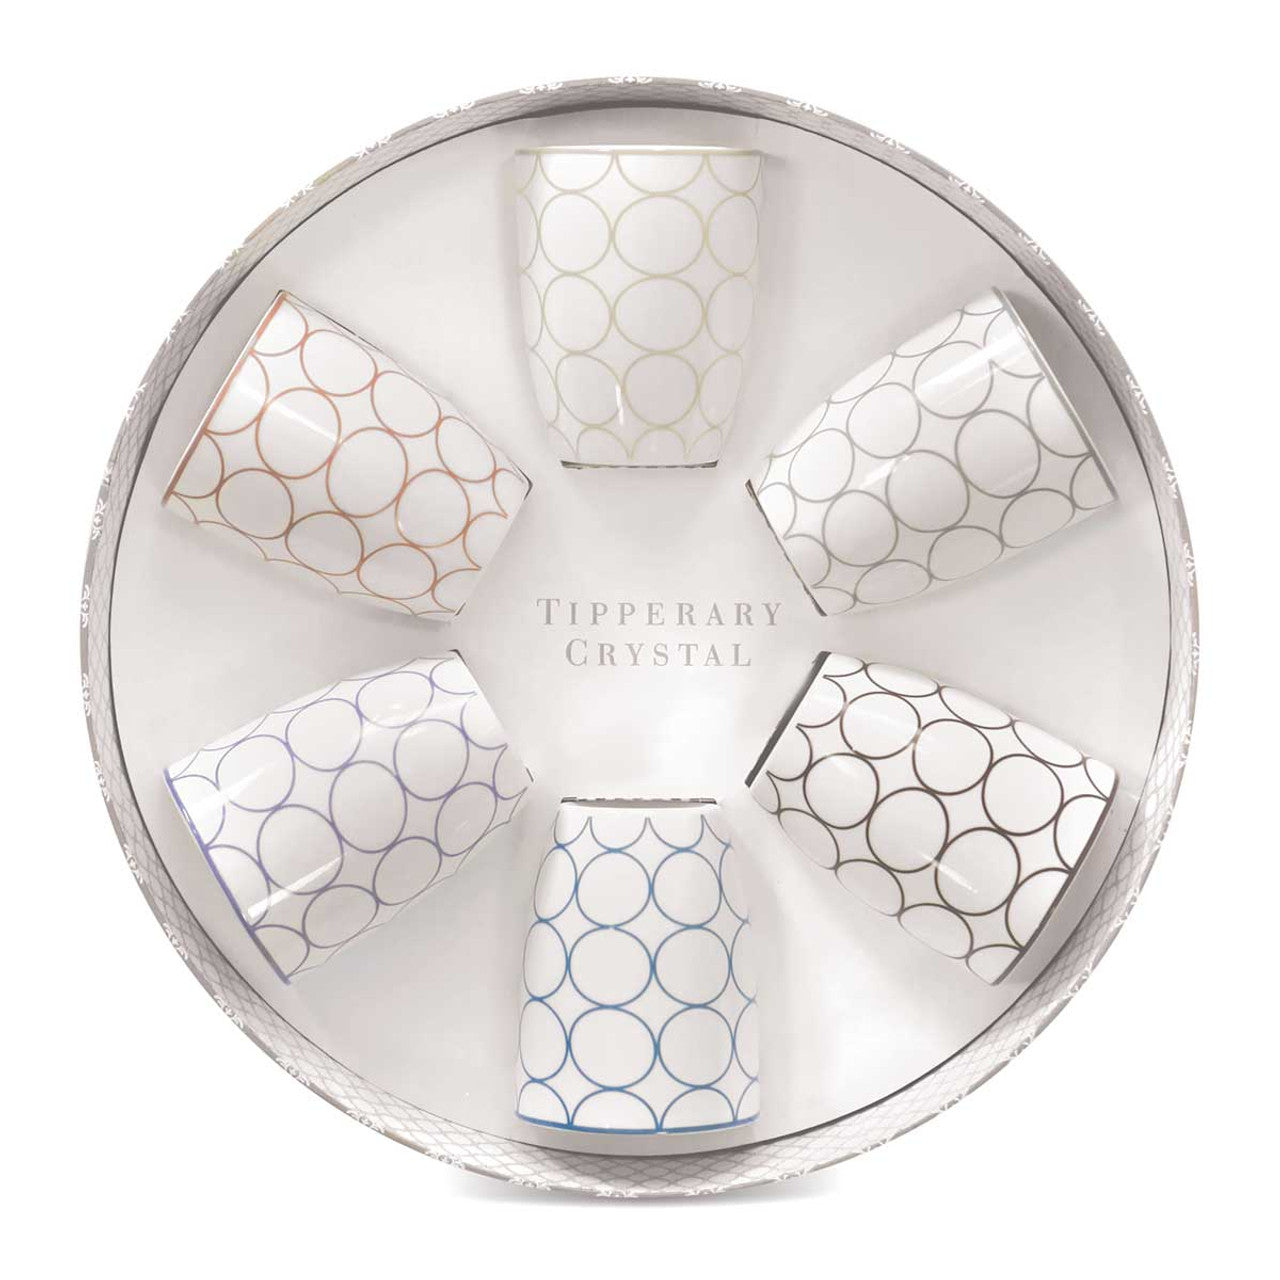 Tipperary Crystal Set Six Circle Mugs in Hatbox  Tipperary Crystal ceramics are made from bone china which gives the ceramic a clean, white finish. Stack crockery separately from other items such as cutlery, saucepans or glass. Over washing will cause the glaze to dull and the design to fade.